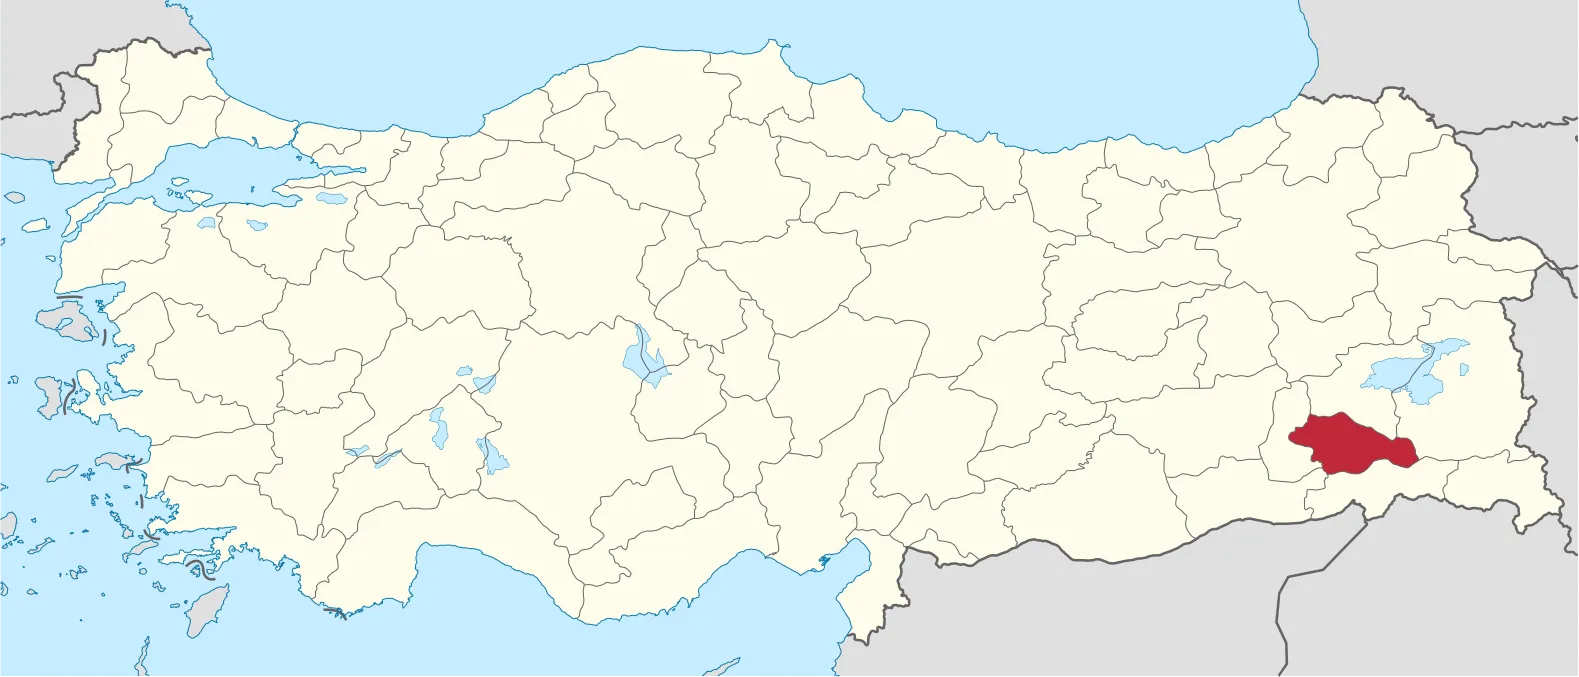 Location of province Siirt in Turkey - image